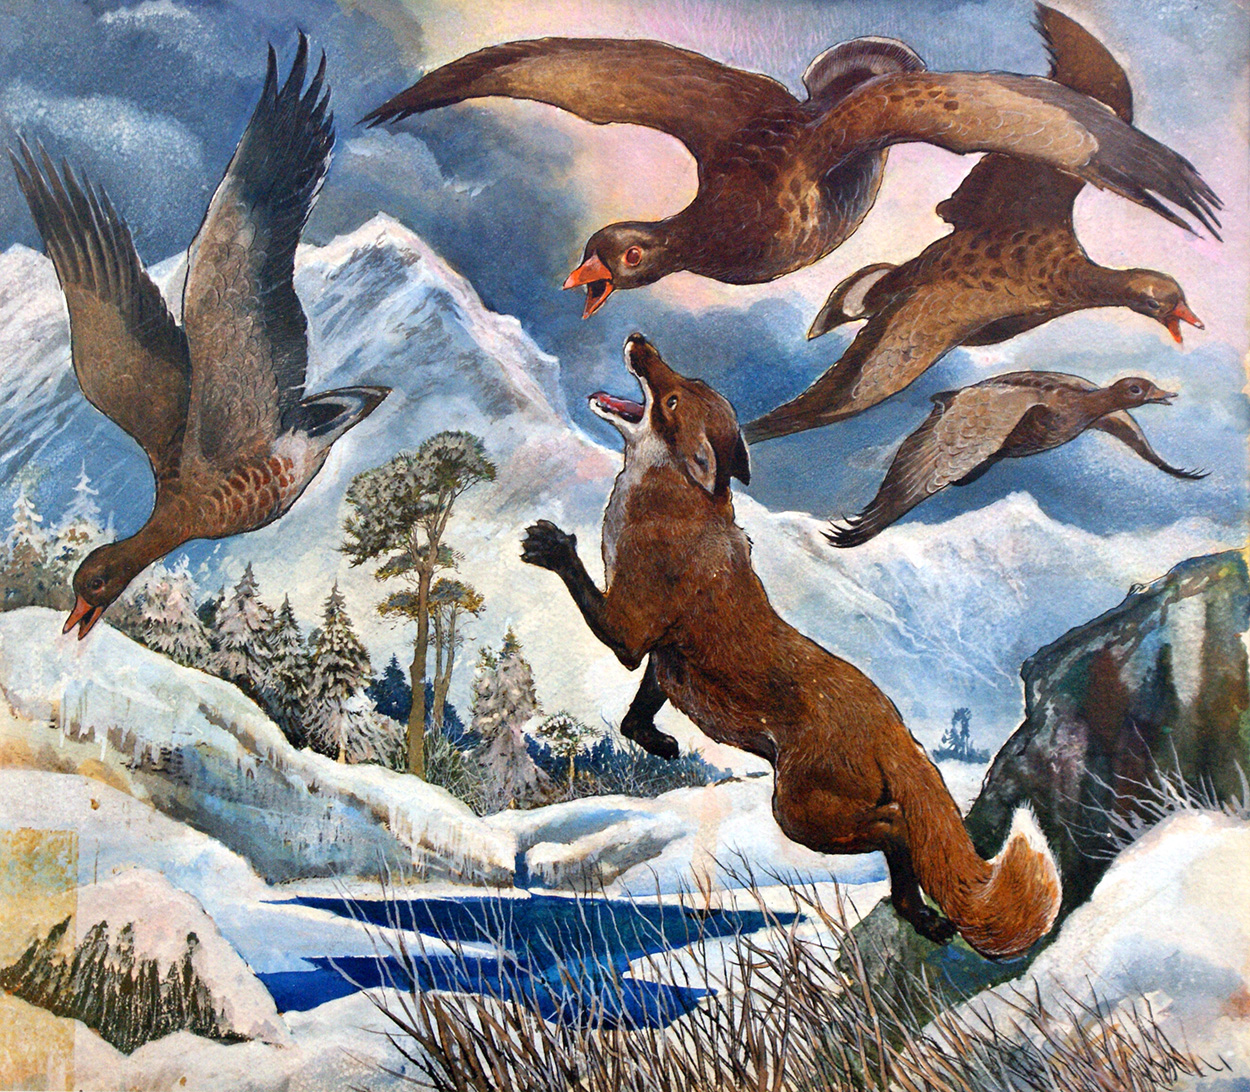 Fox and Geese (Original) art by G W Backhouse Art at The Illustration Art Gallery